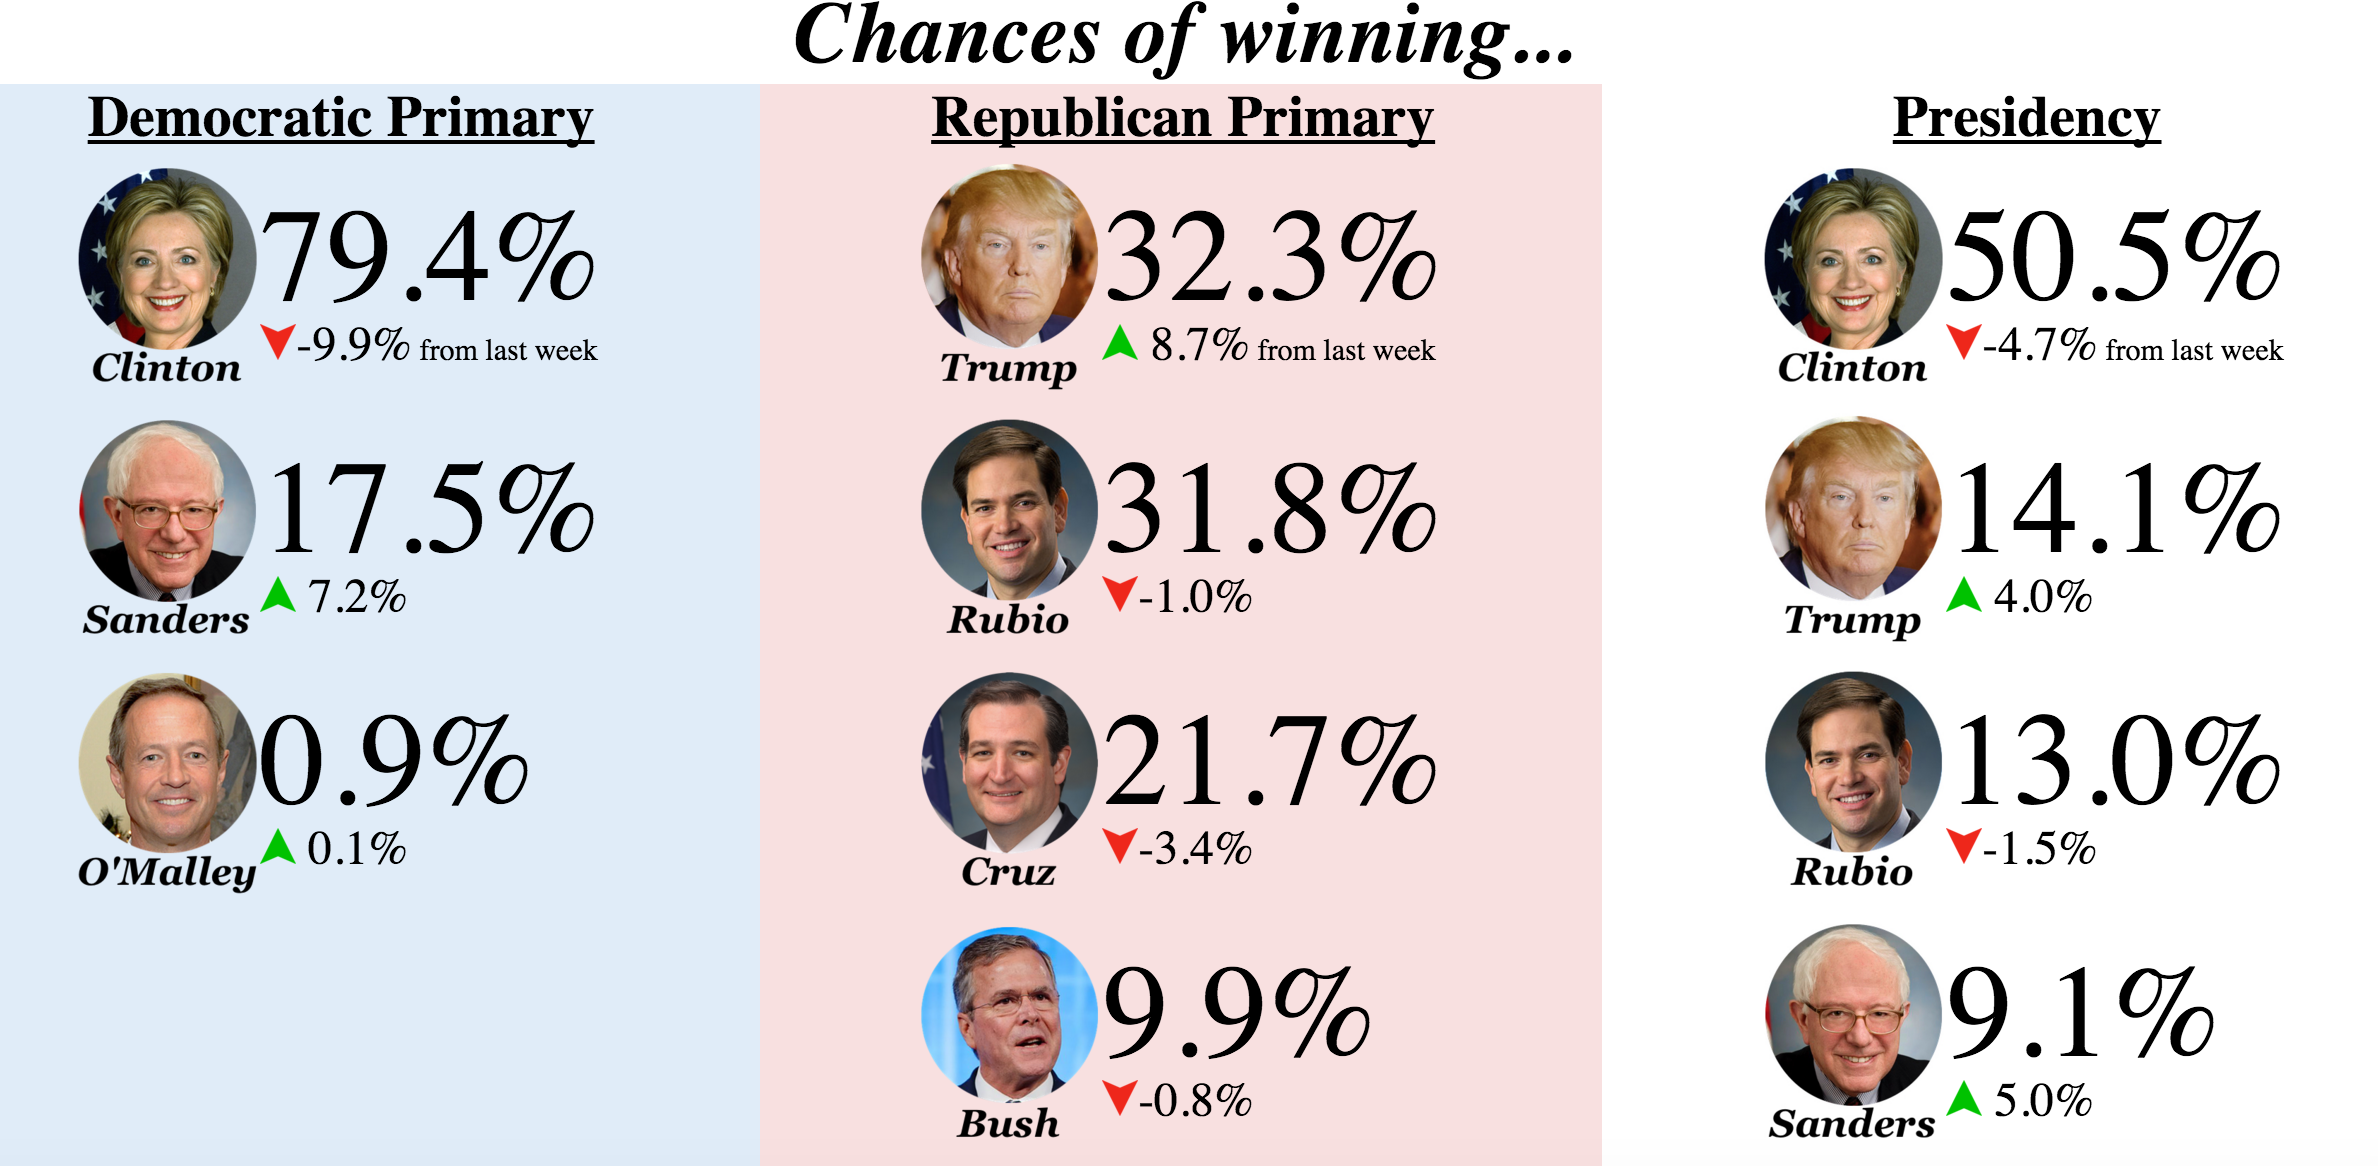 online betting odds presidential election